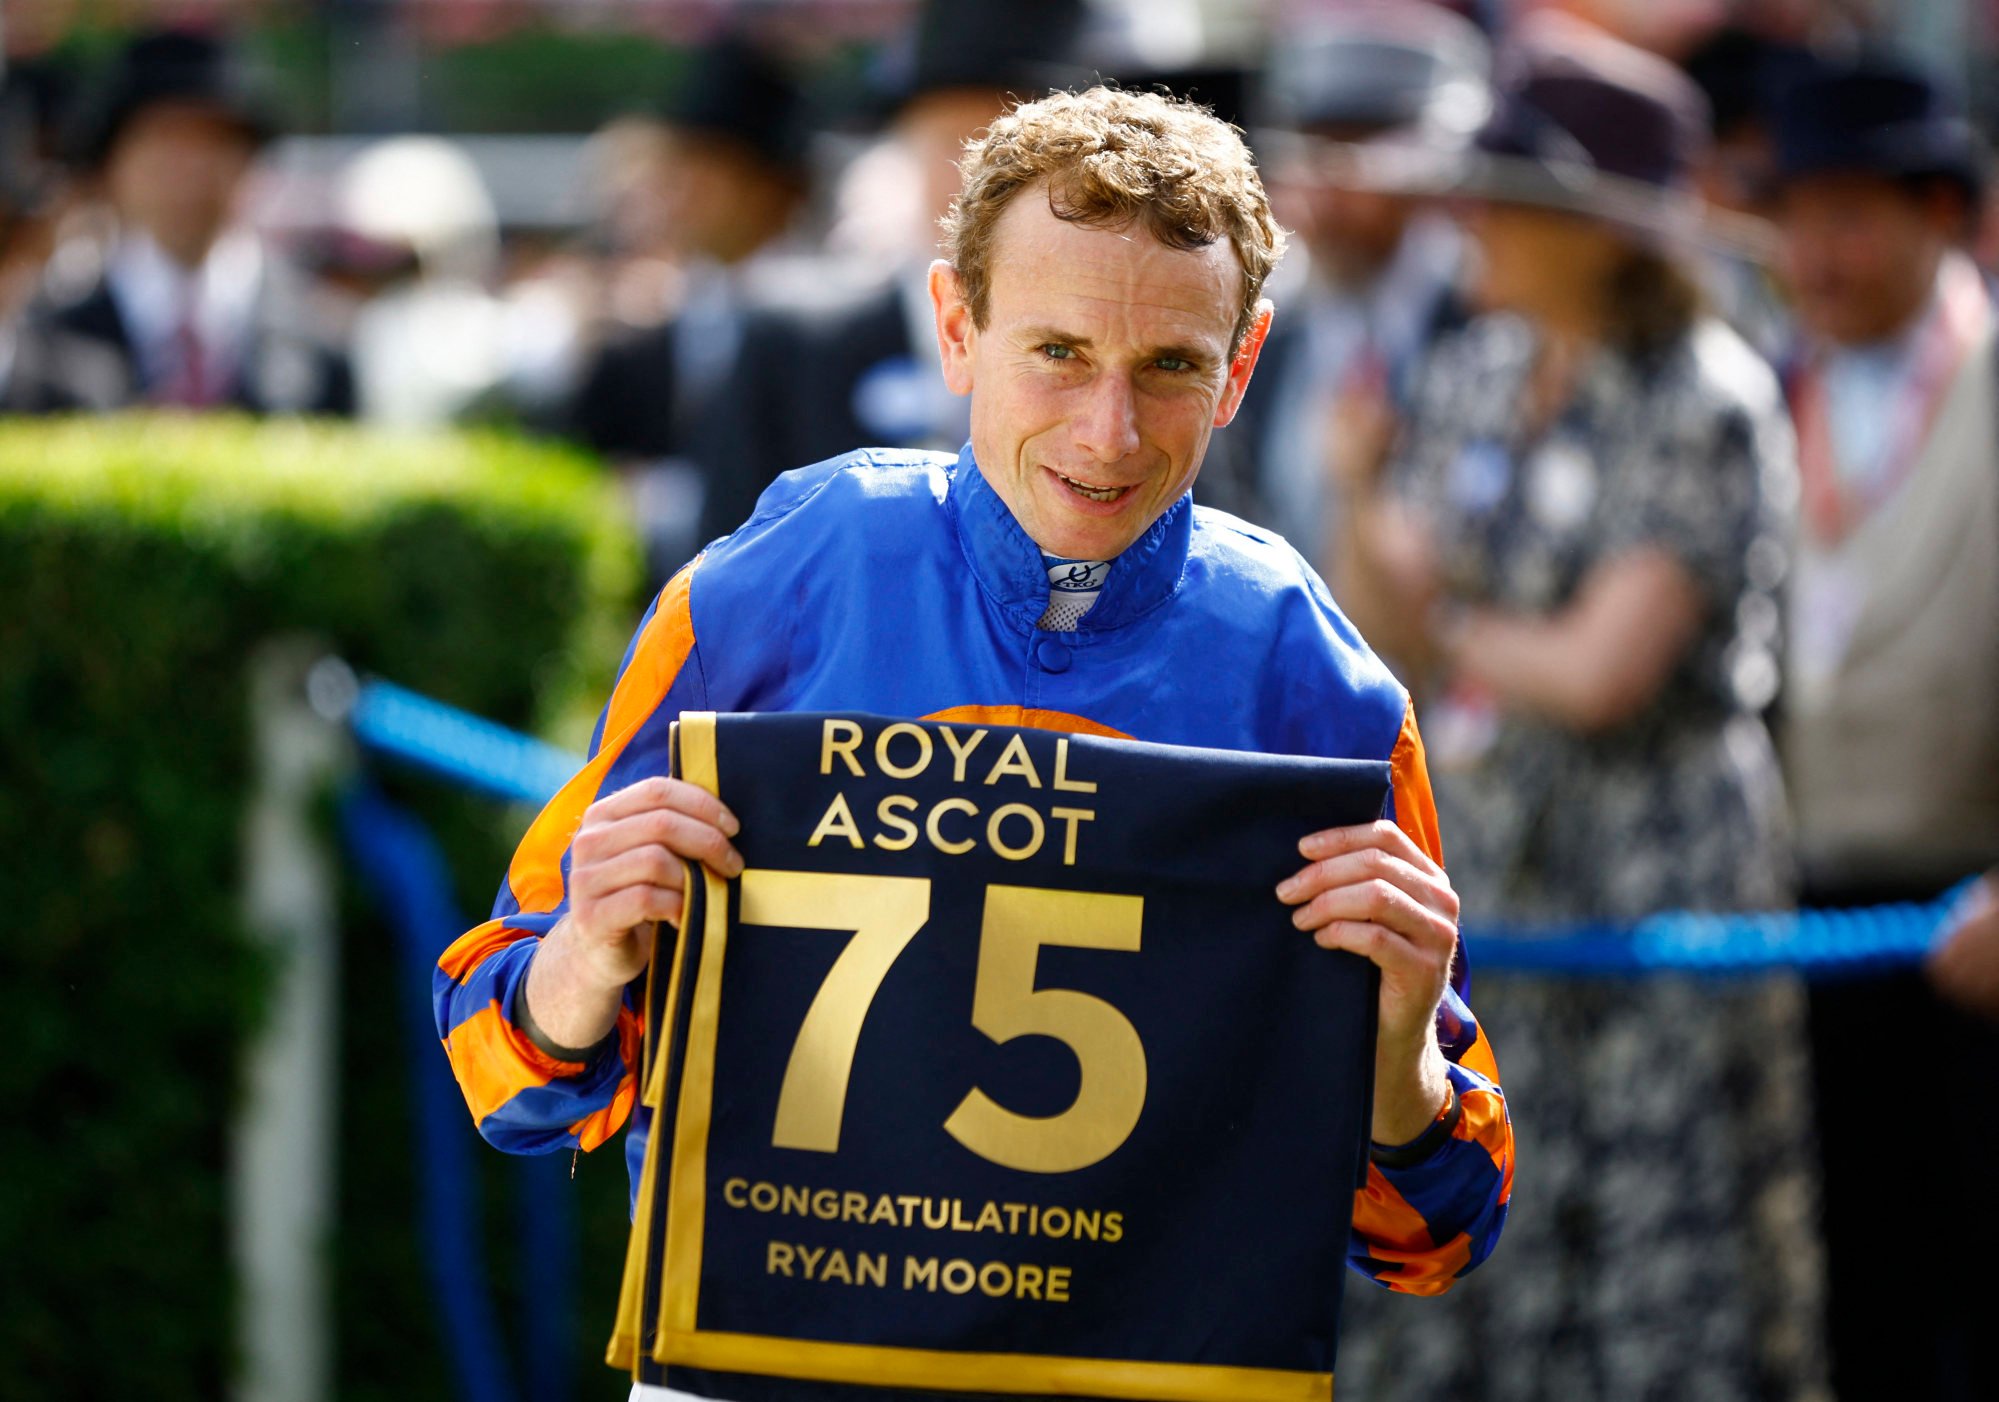 Ryan Moore celebrates after winning the St James’s Palace Stakes aboard Paddington on Tuesday. Photo: Reuters